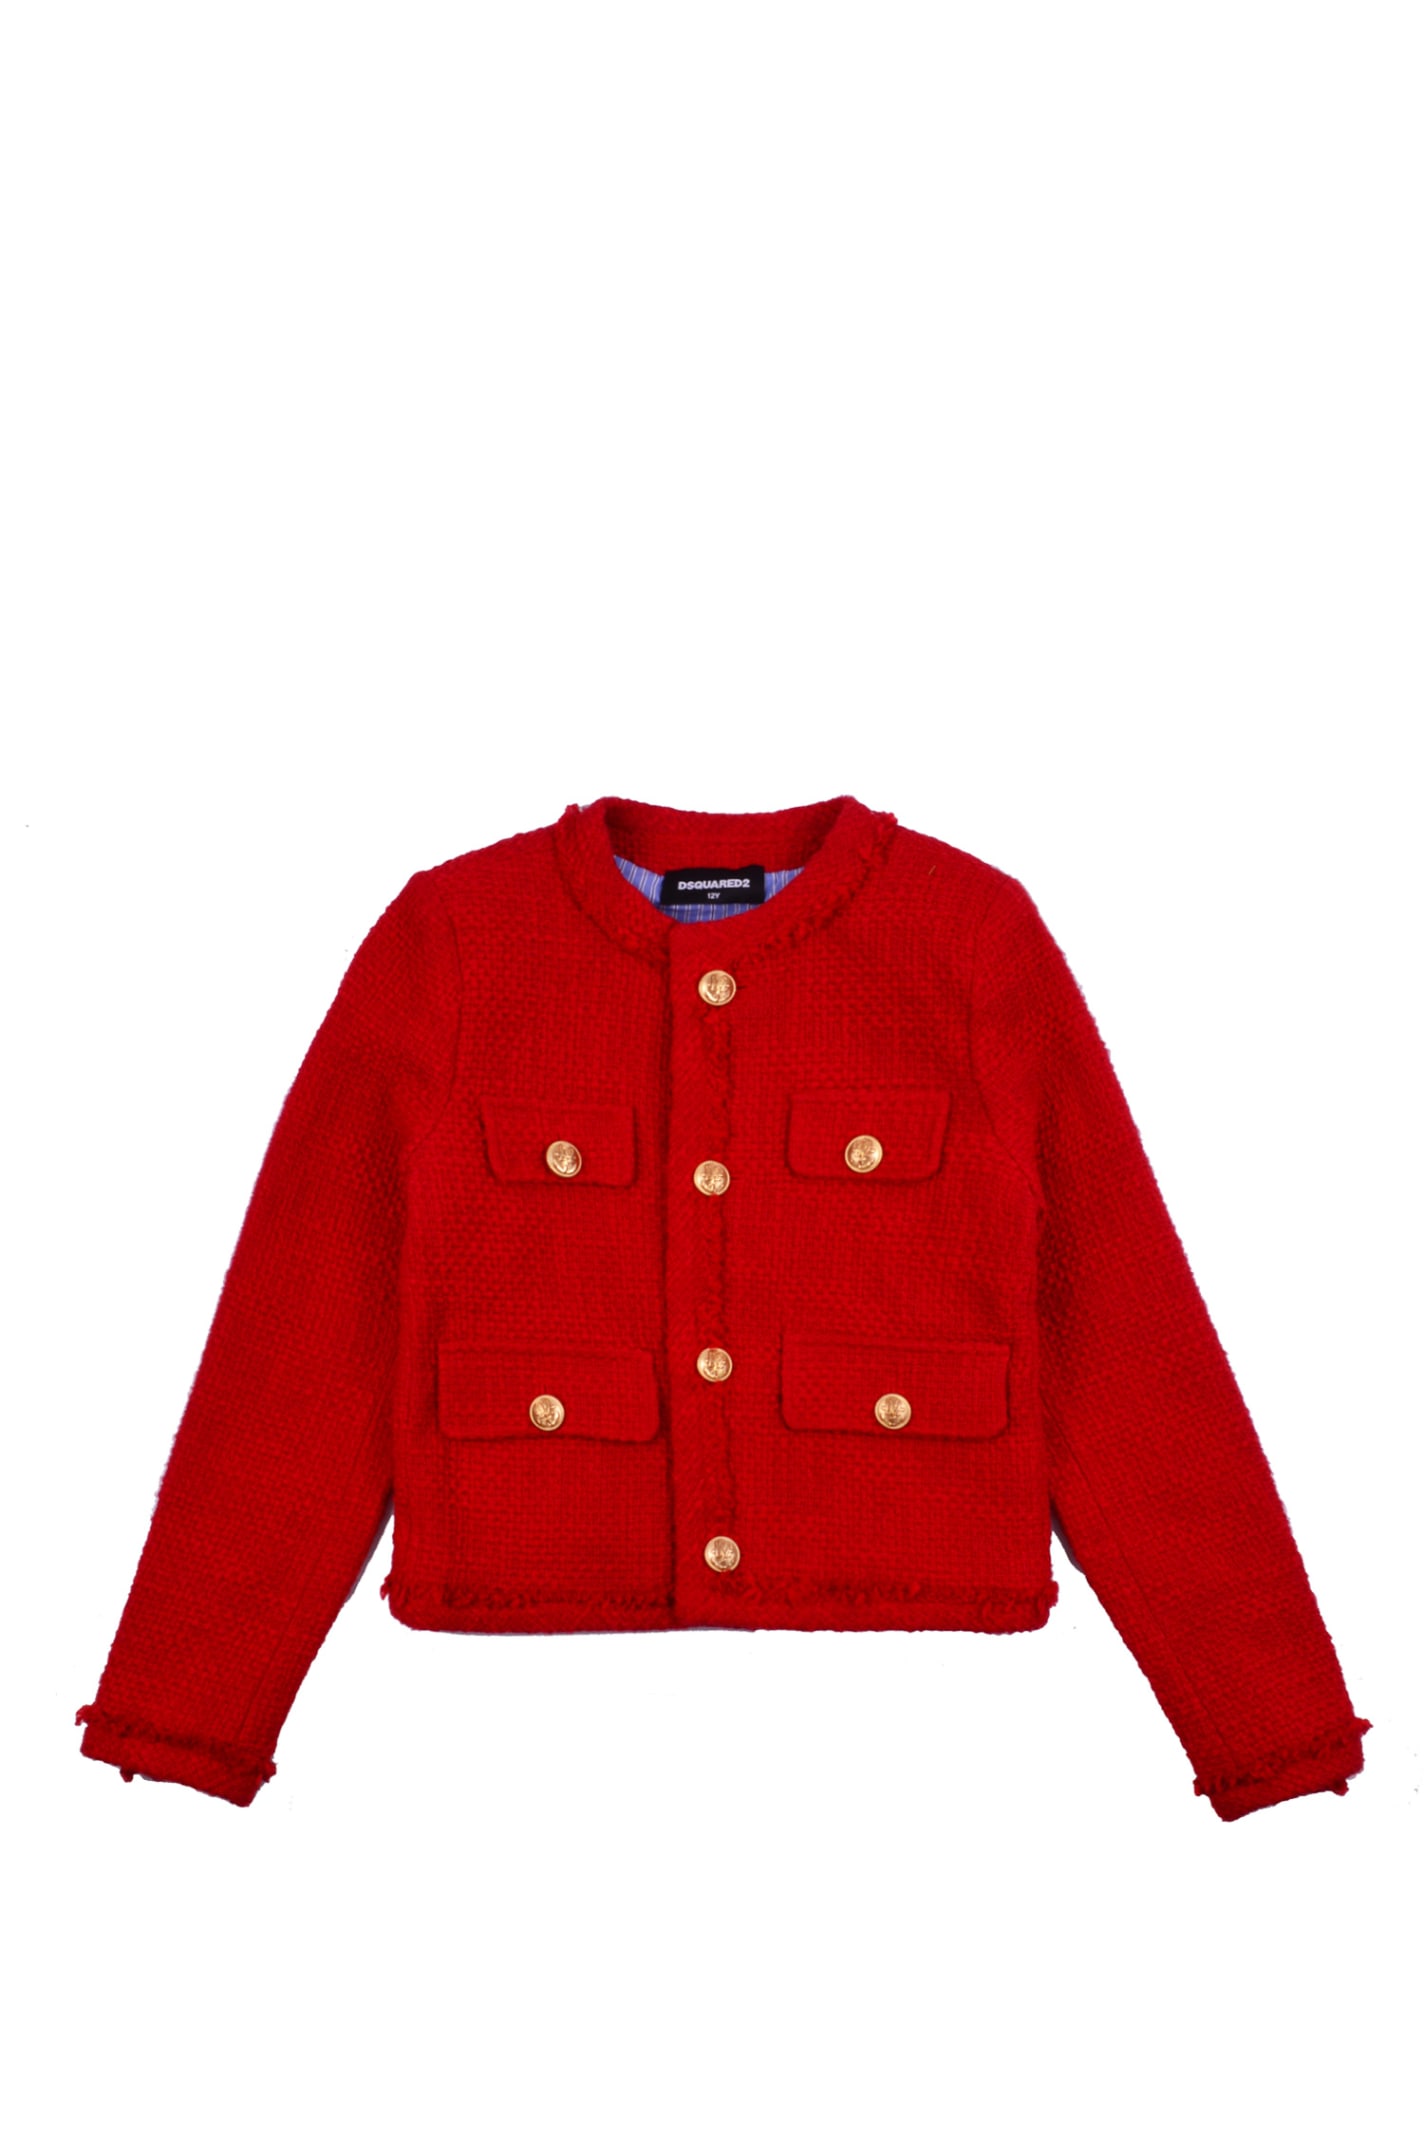 Dsquared2 Jacket With Gold Colored Buttons